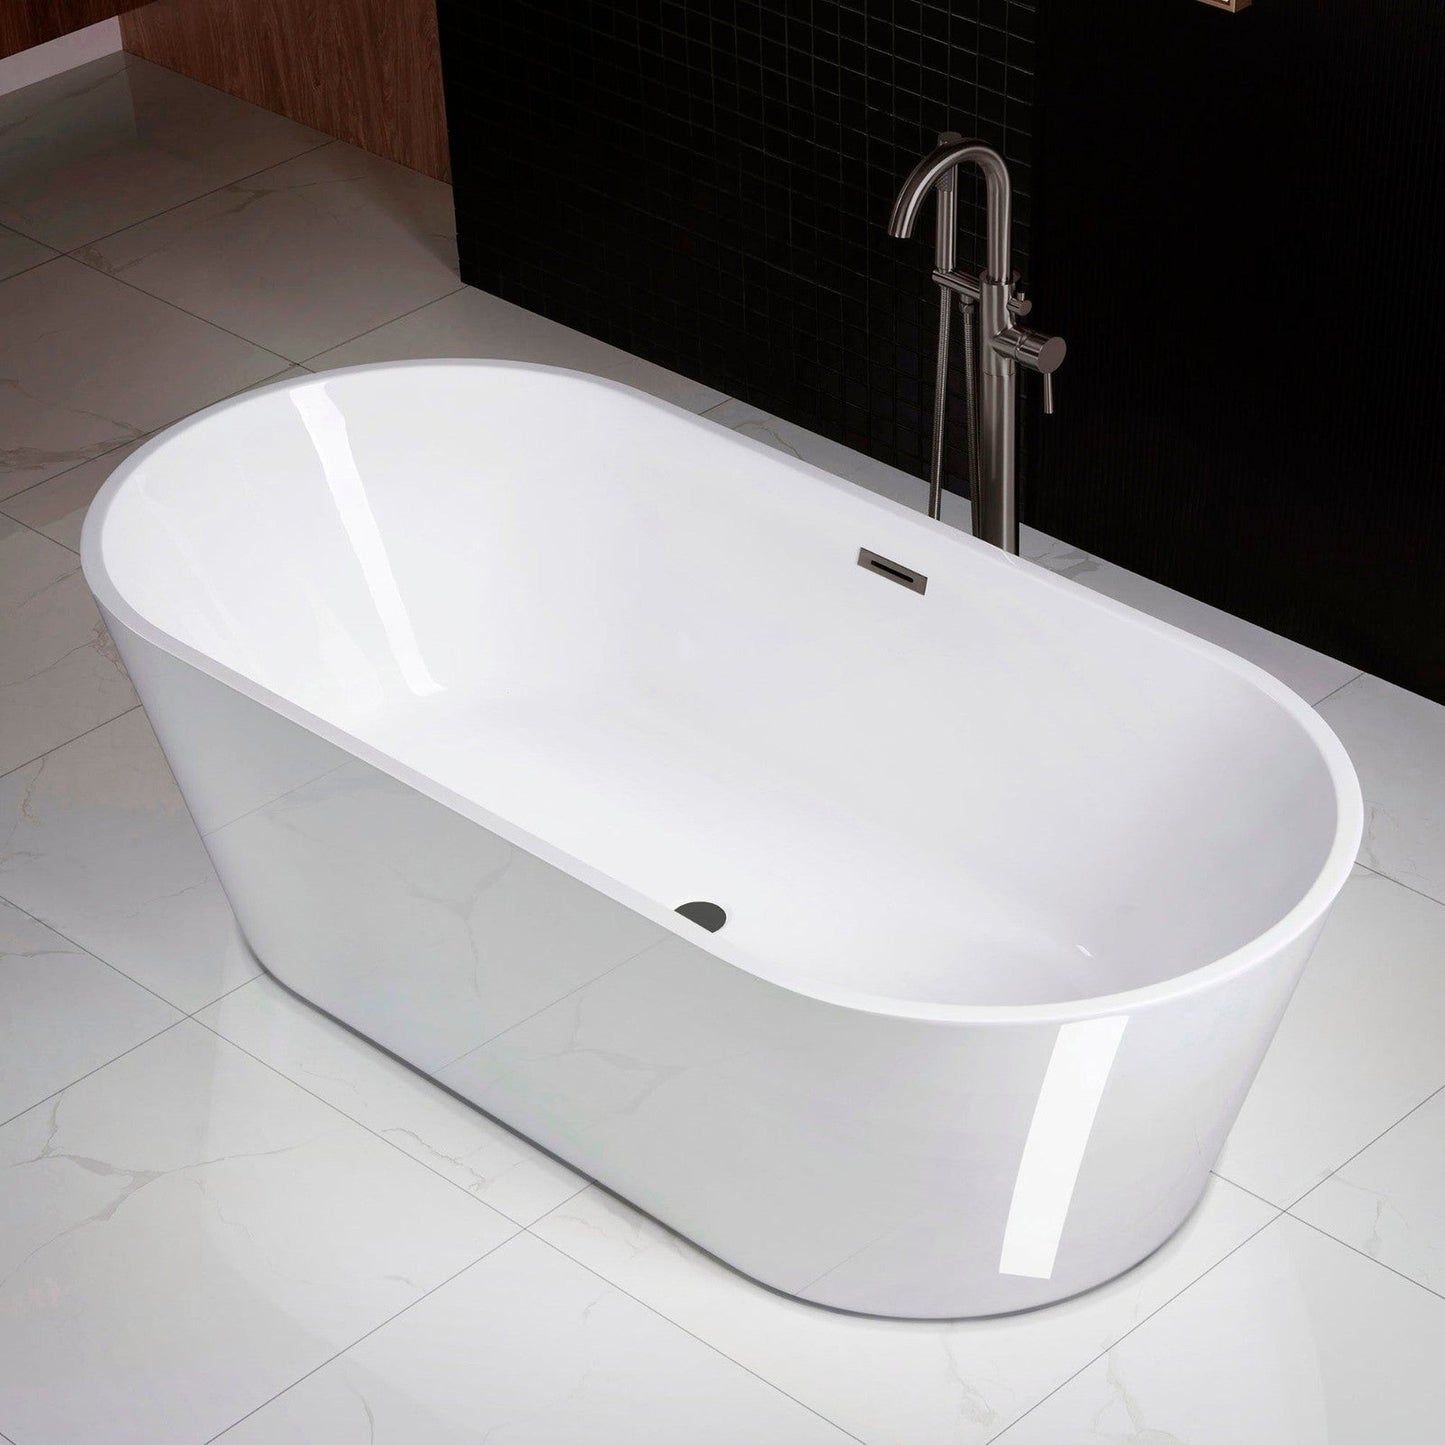 WoodBridge 71" White Acrylic Freestanding Contemporary Soaking Bathtub With Matte Black Drain, Overflow, F0072MBRD Tub Filler and Caddy Tray